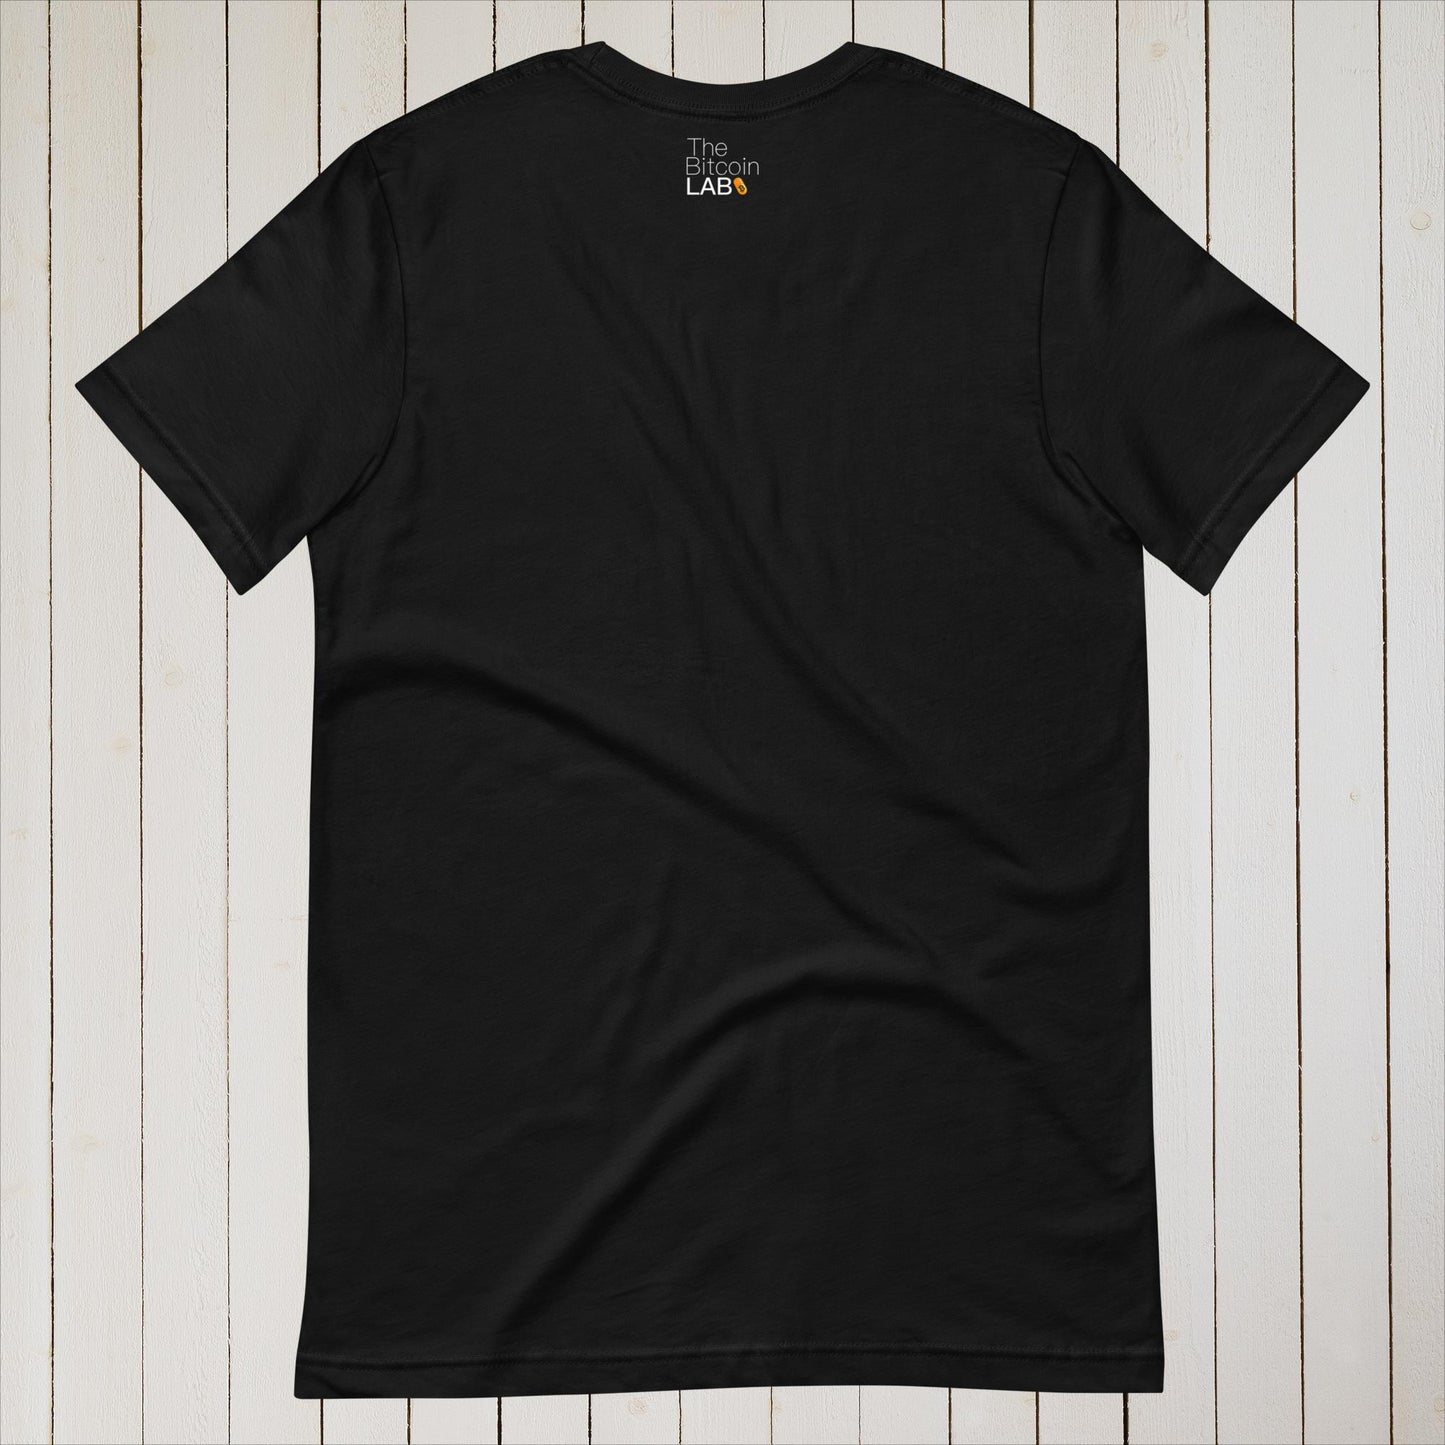 Bitcoin STEALTH Embroidered T-Shirt